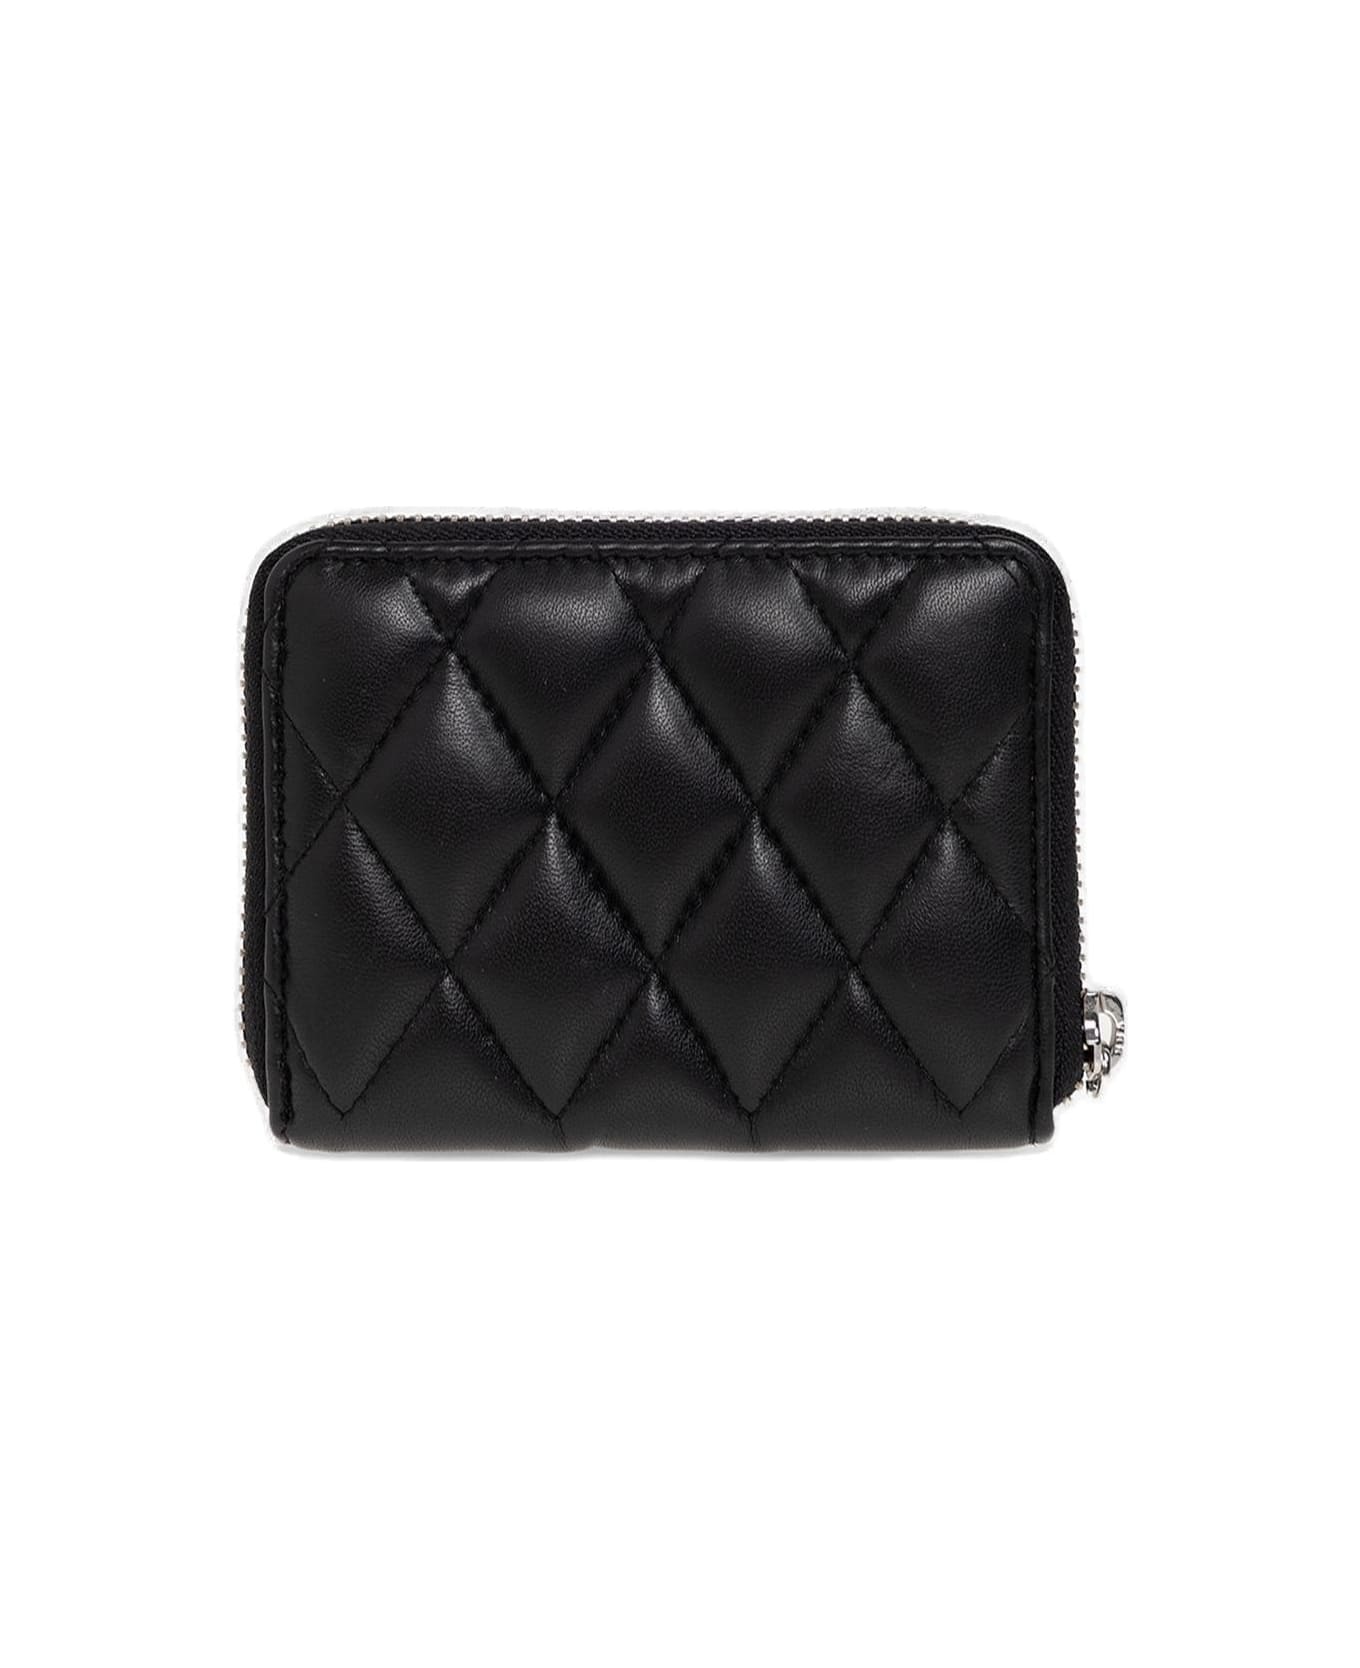 Zadig & Voltaire Studded Mini Coin Purse - Black クラッチバッグ